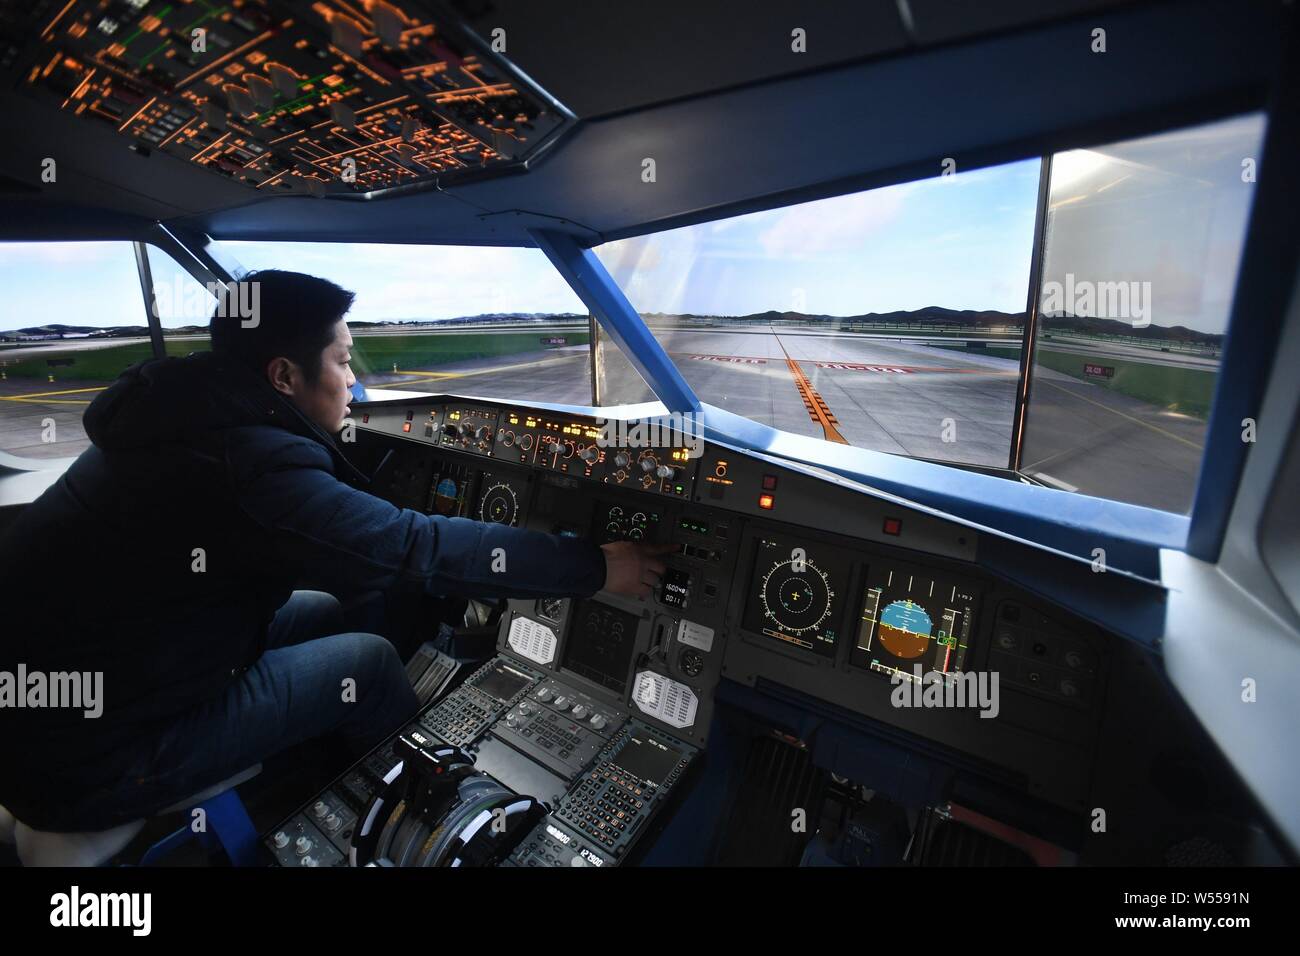 Chinese farmer Zhu Yue tests in the cockpit of a full-scale replica of Airbus A320 jet plane built by him at an open space in Kaiyuan city, northeast Stock Photo